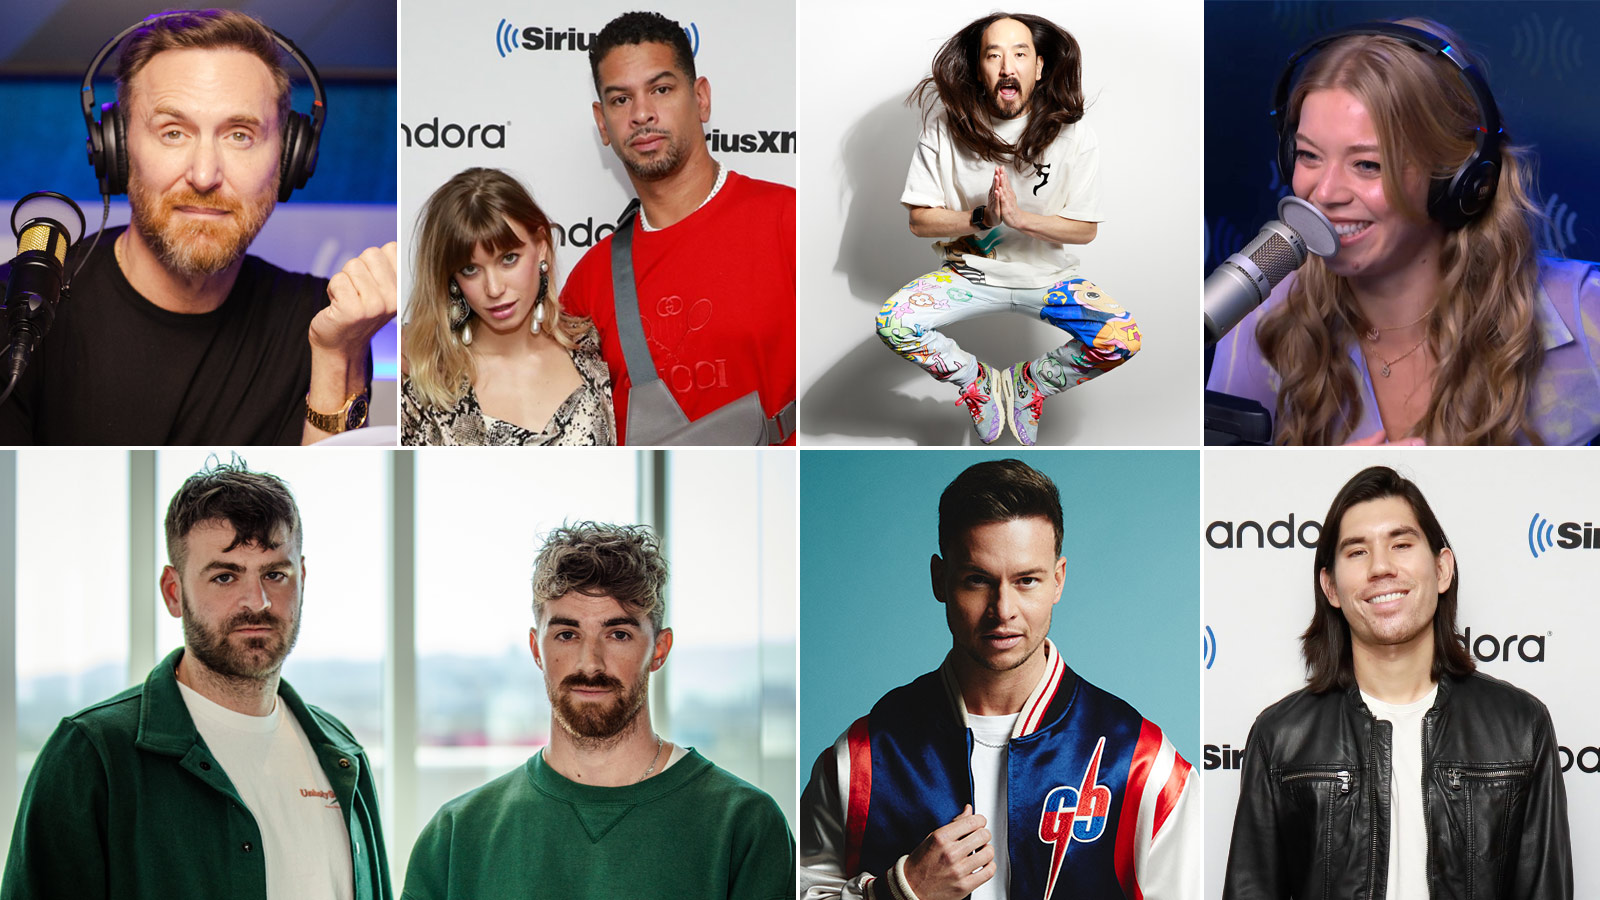 David Guetta, Anabel Englund, MK, Steve Aoki, Becky Hill, The Chainsmokers, Joel Corry and Gryffin. 